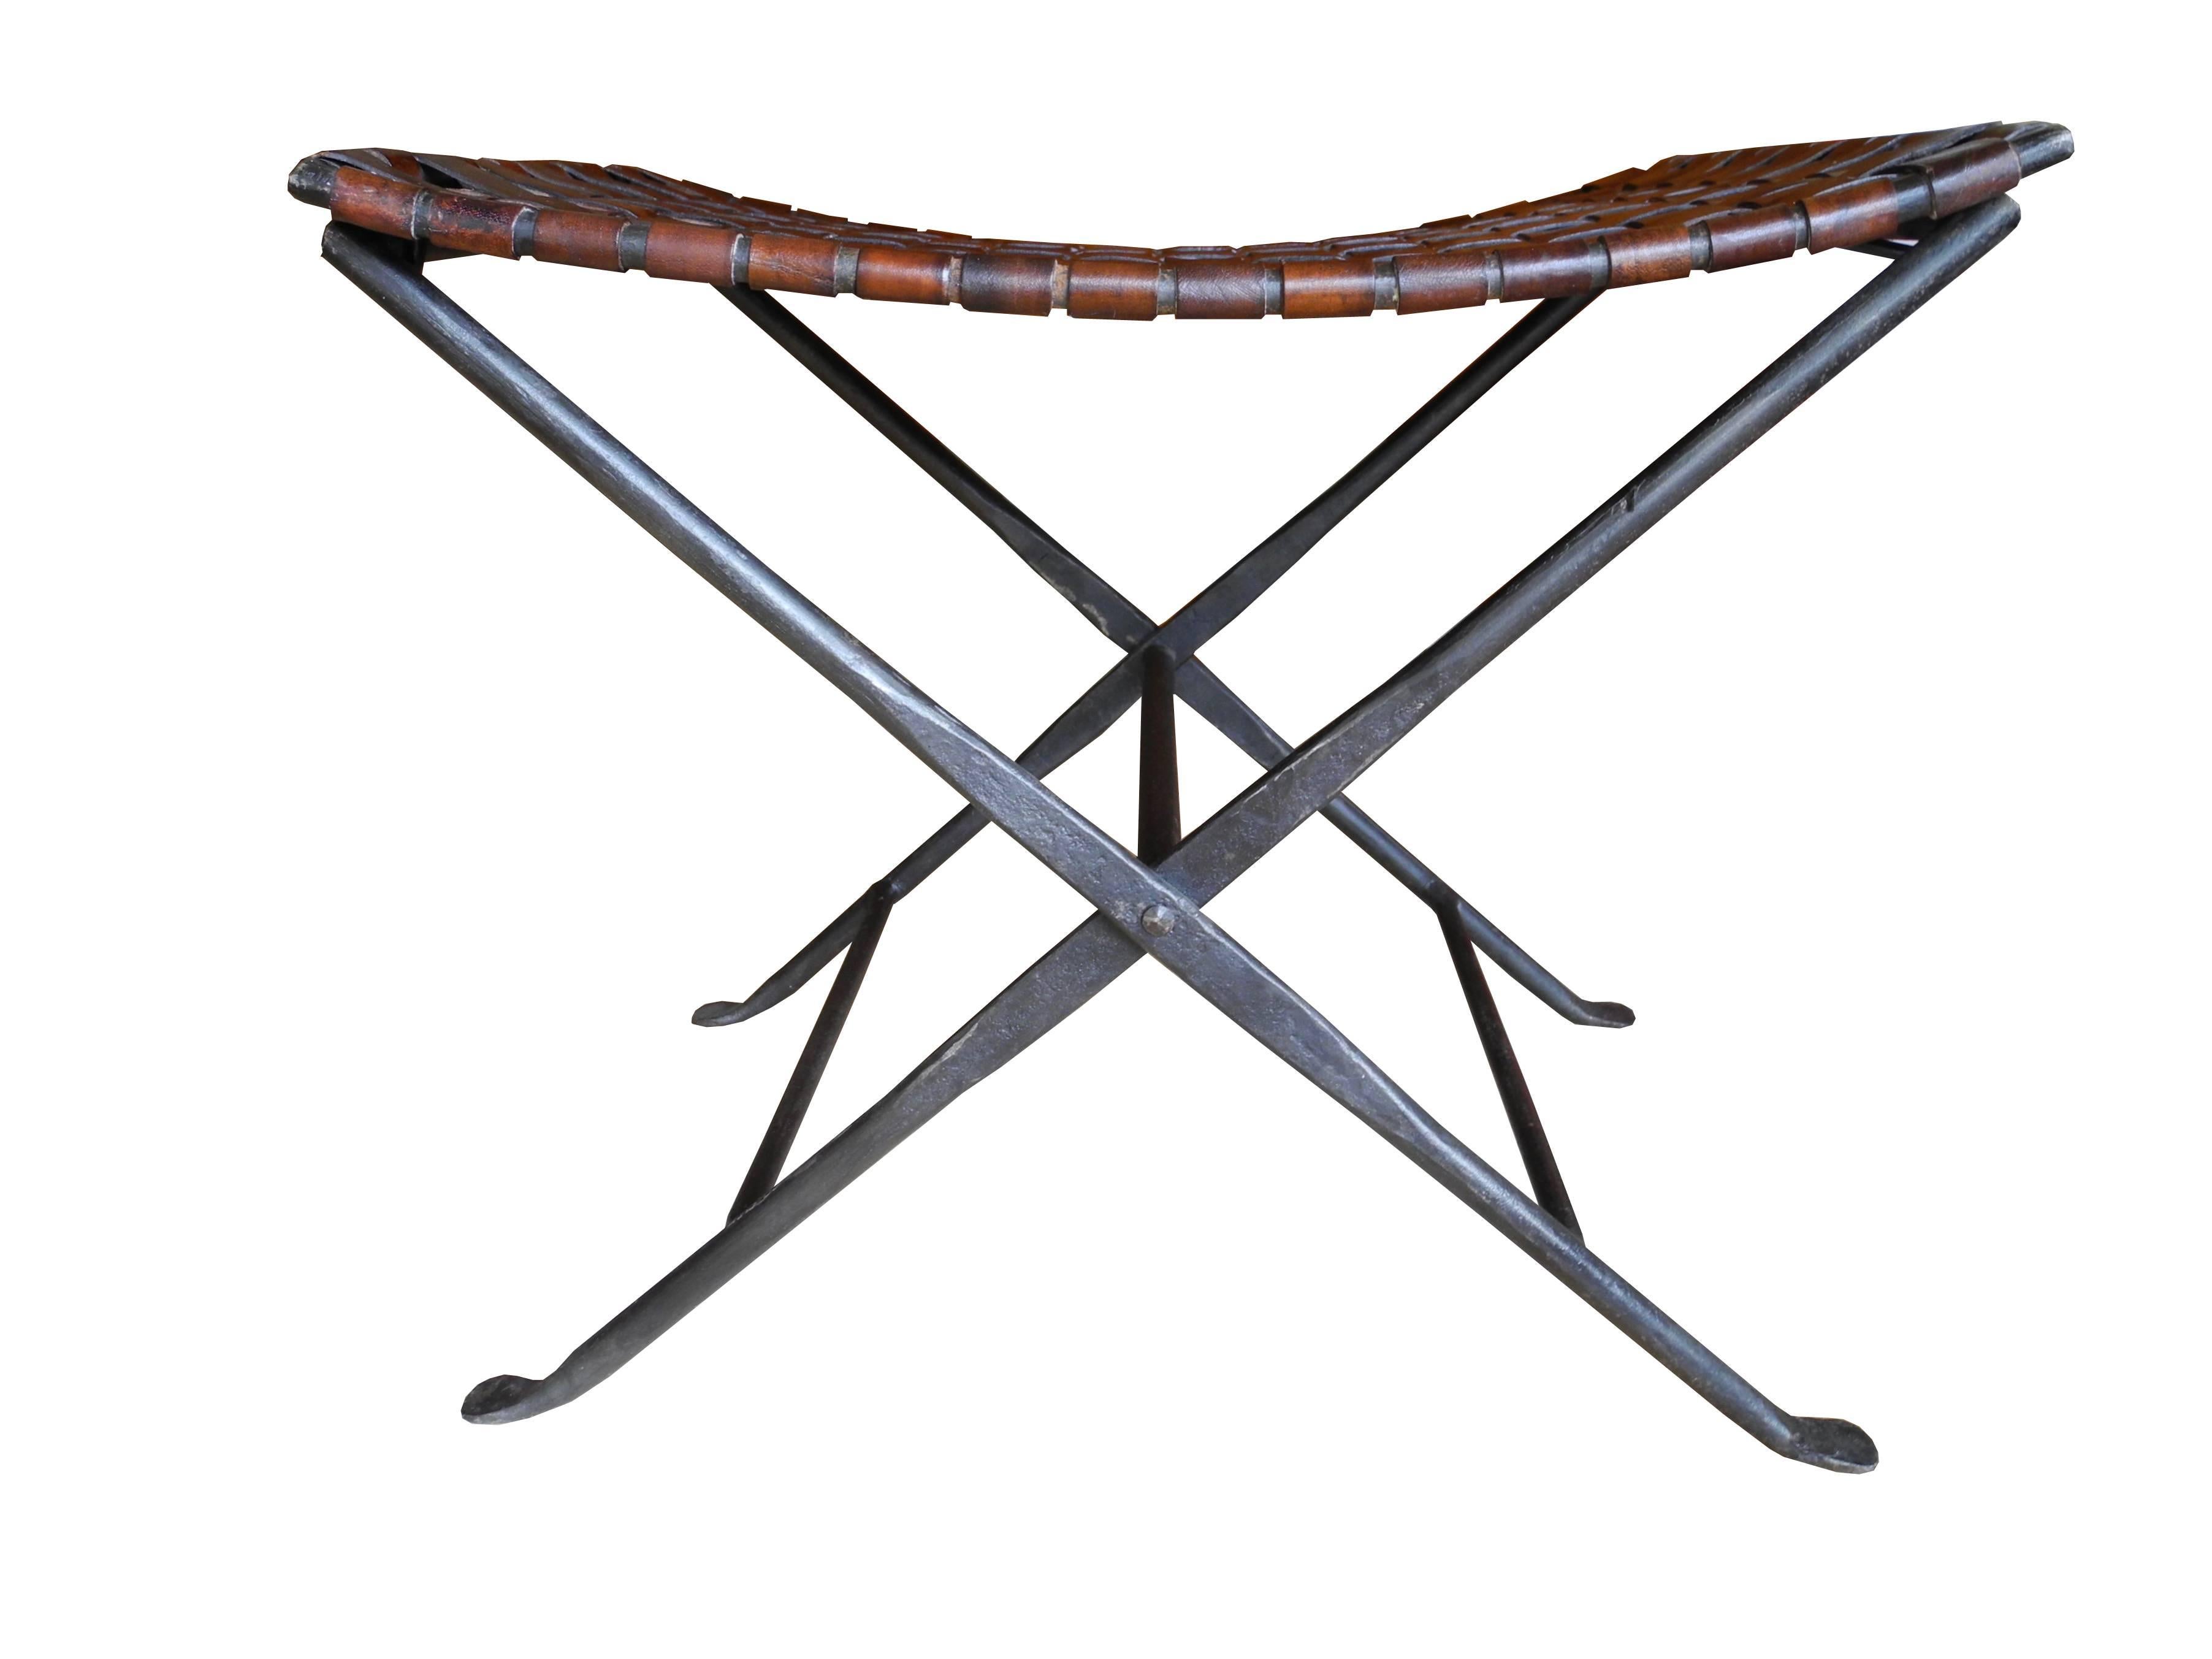 This folding stool has been handcrafted. Made of forged wrought iron and brown strips of woven saddle leather. Beautifully made.